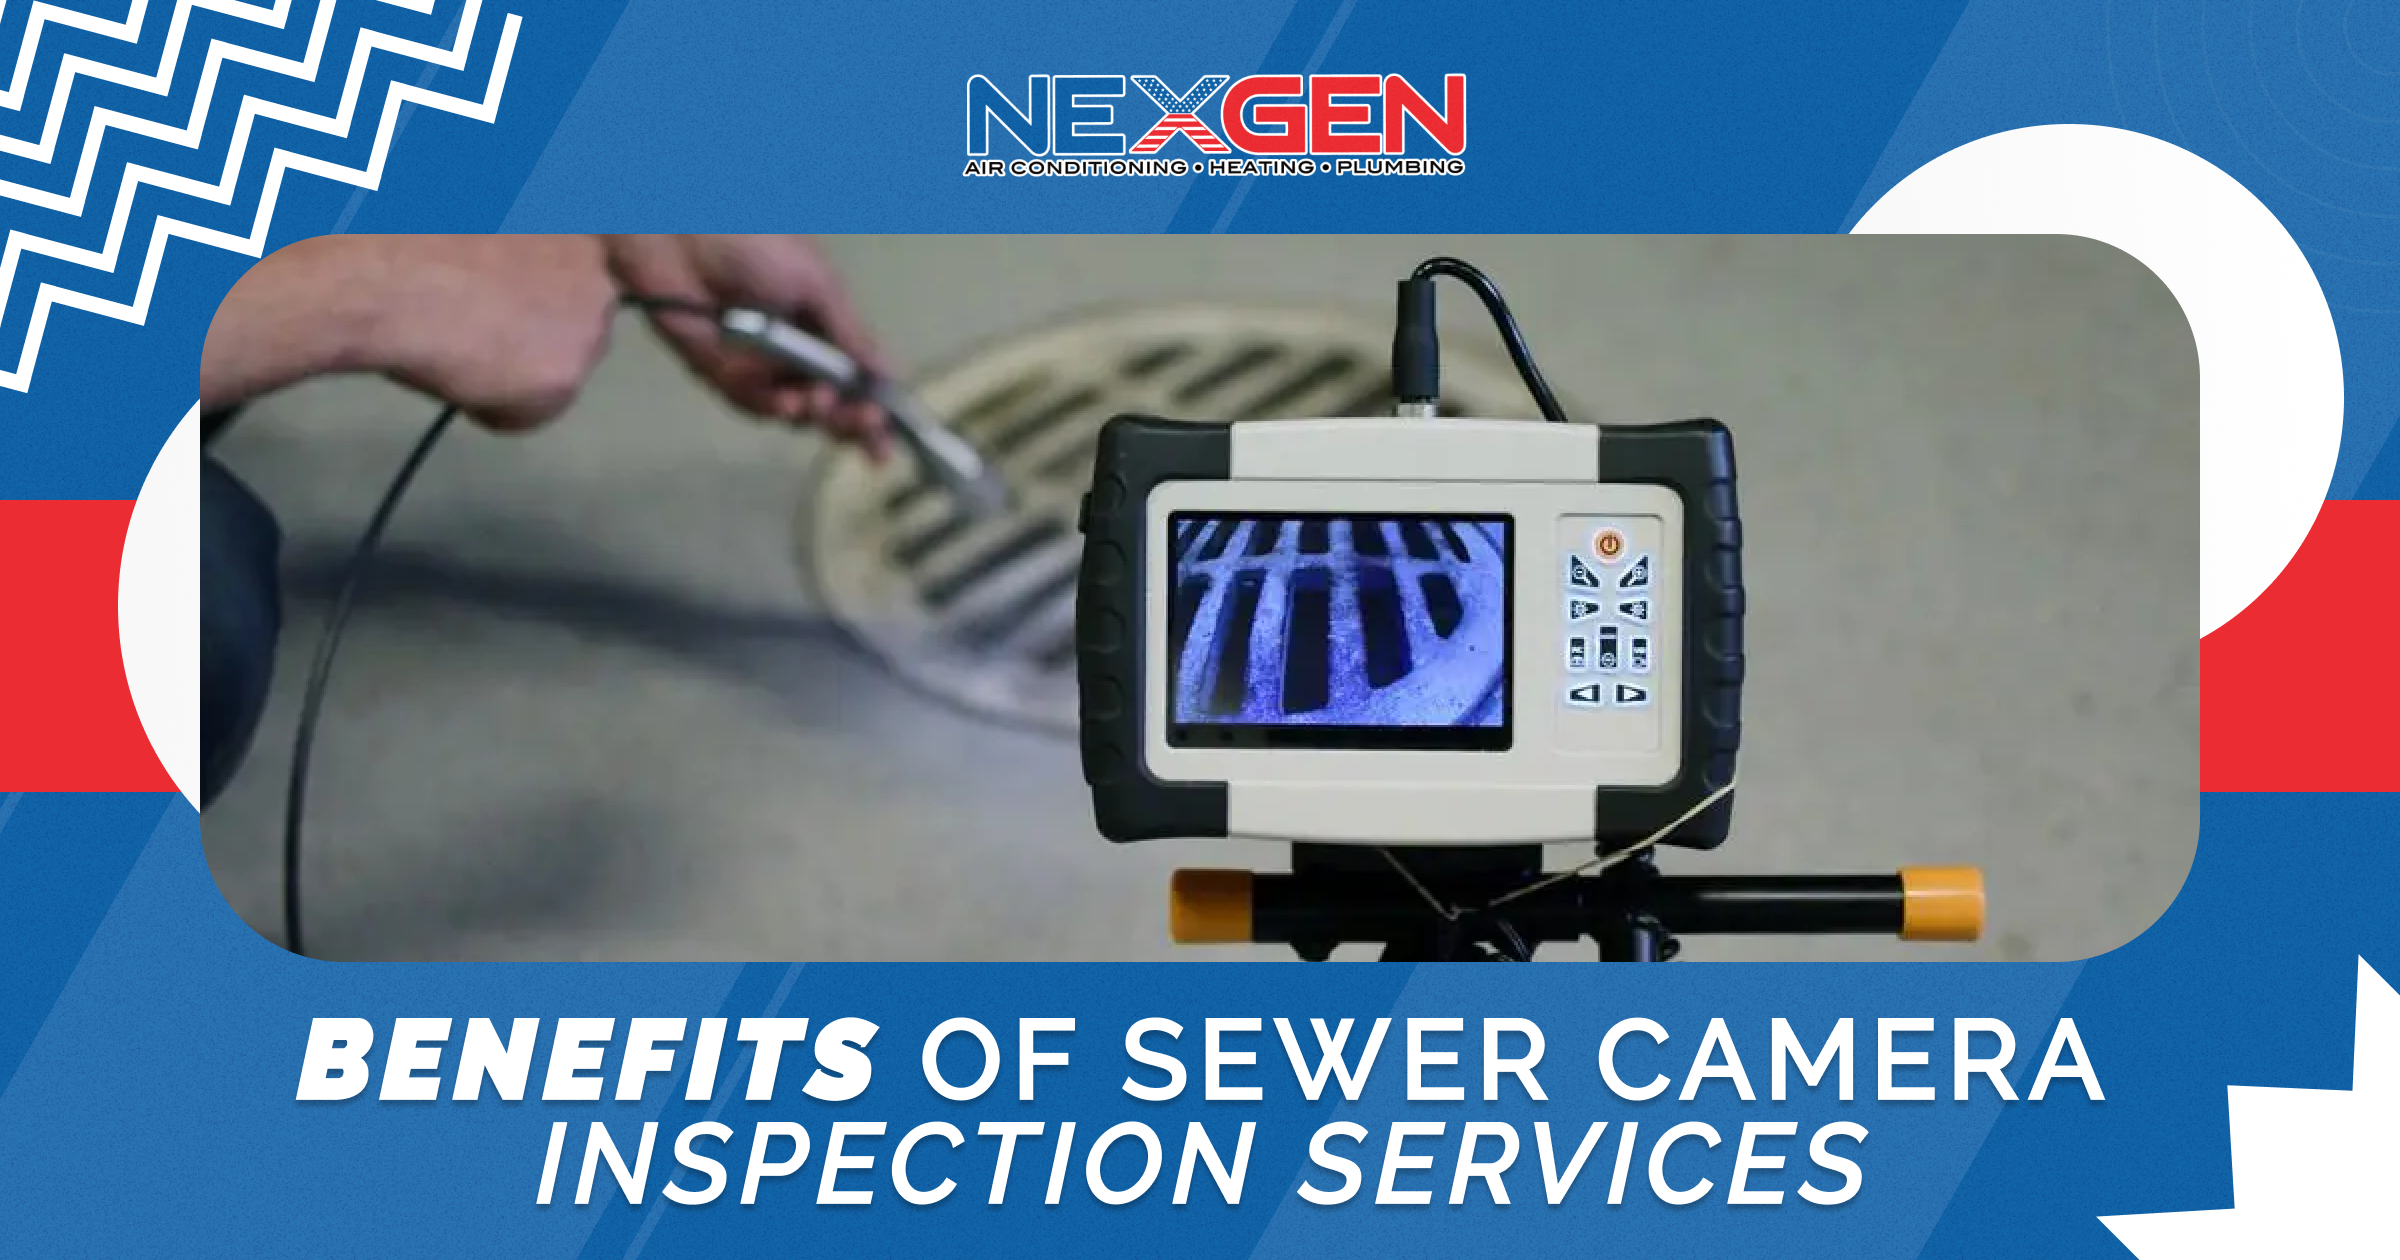 NexGen Benefits of Sewer Camera Inspection Services 1